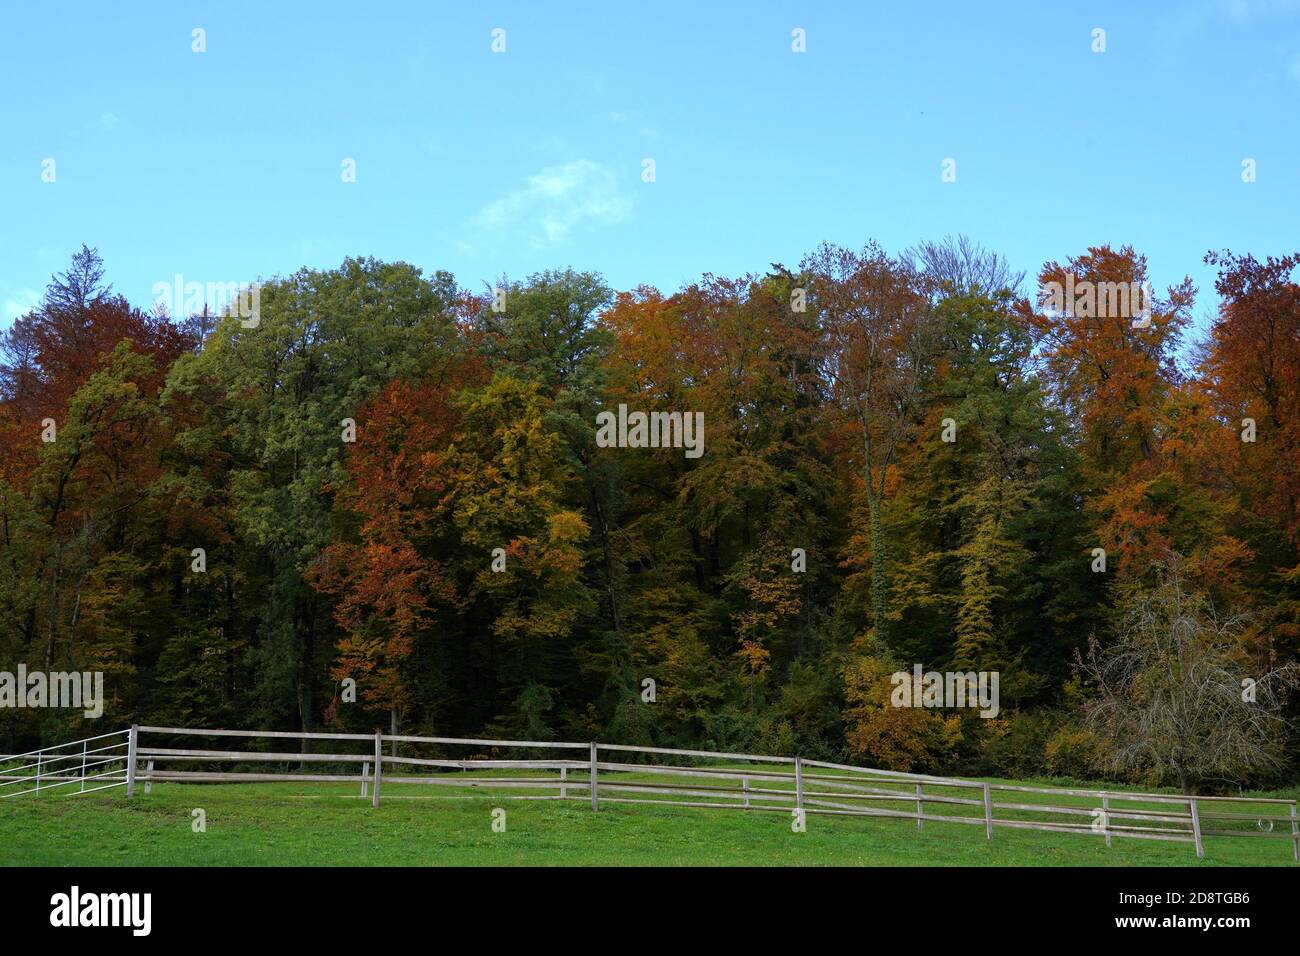 Pasture or grazing land with enclosures for cattle with a deciduous forest in various autumn colors on the background. The pastures are in dairy farm. Stock Photo